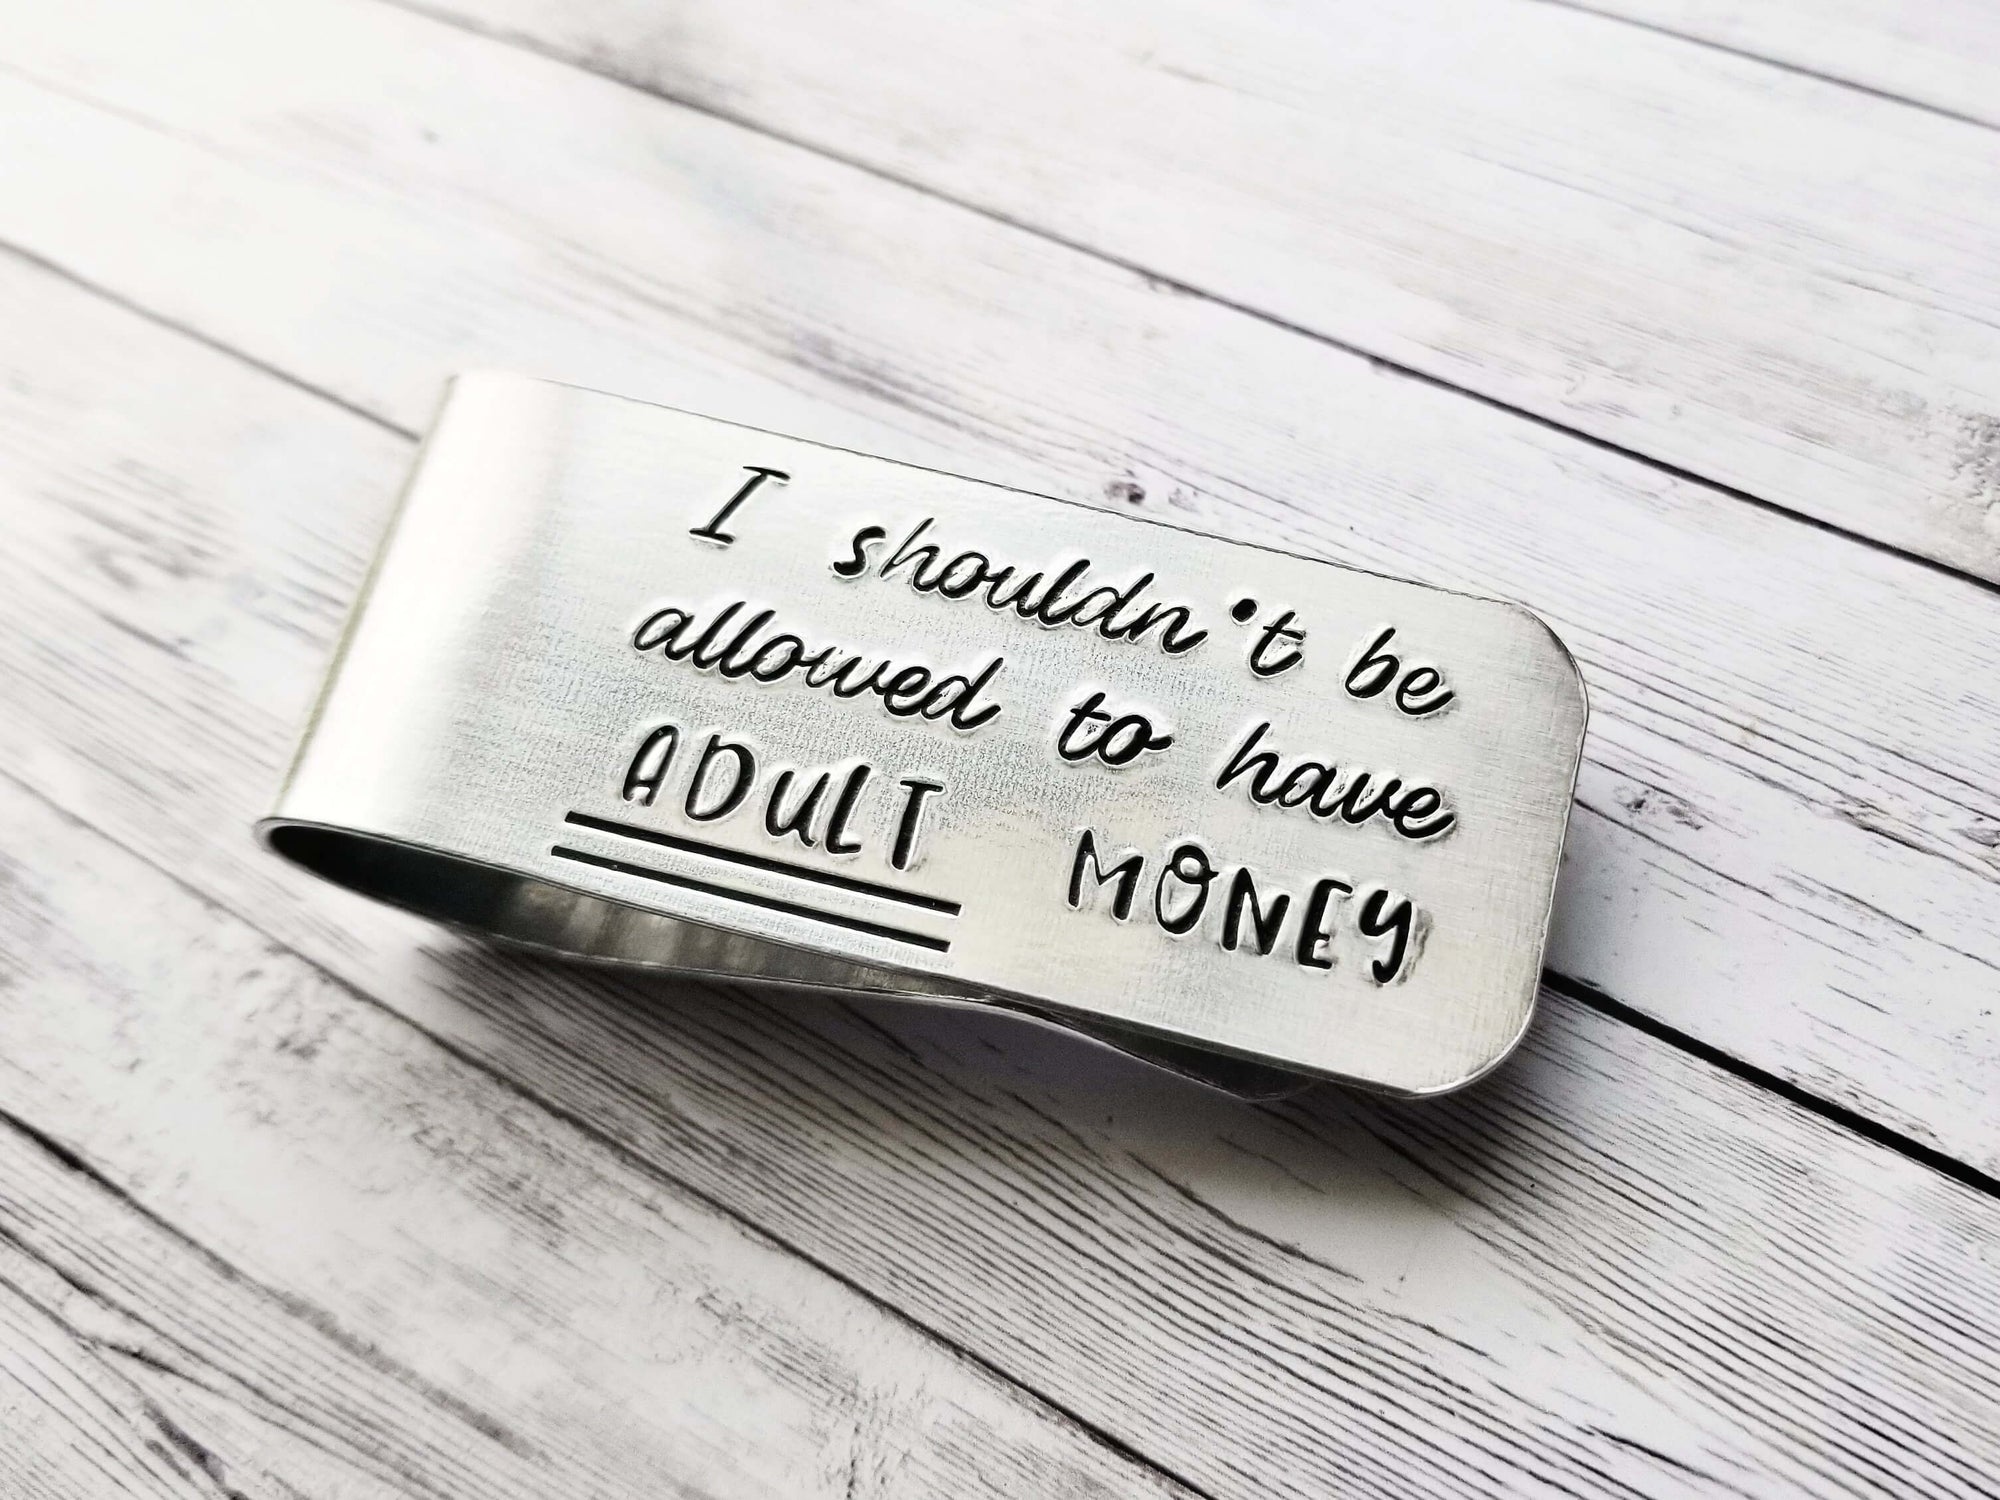 Adult Money, Father's Money Clip, Custom Money Clip, Funny Dad Gift ,Gift for Dad, Fathers Day Gift, Dad Money Clip